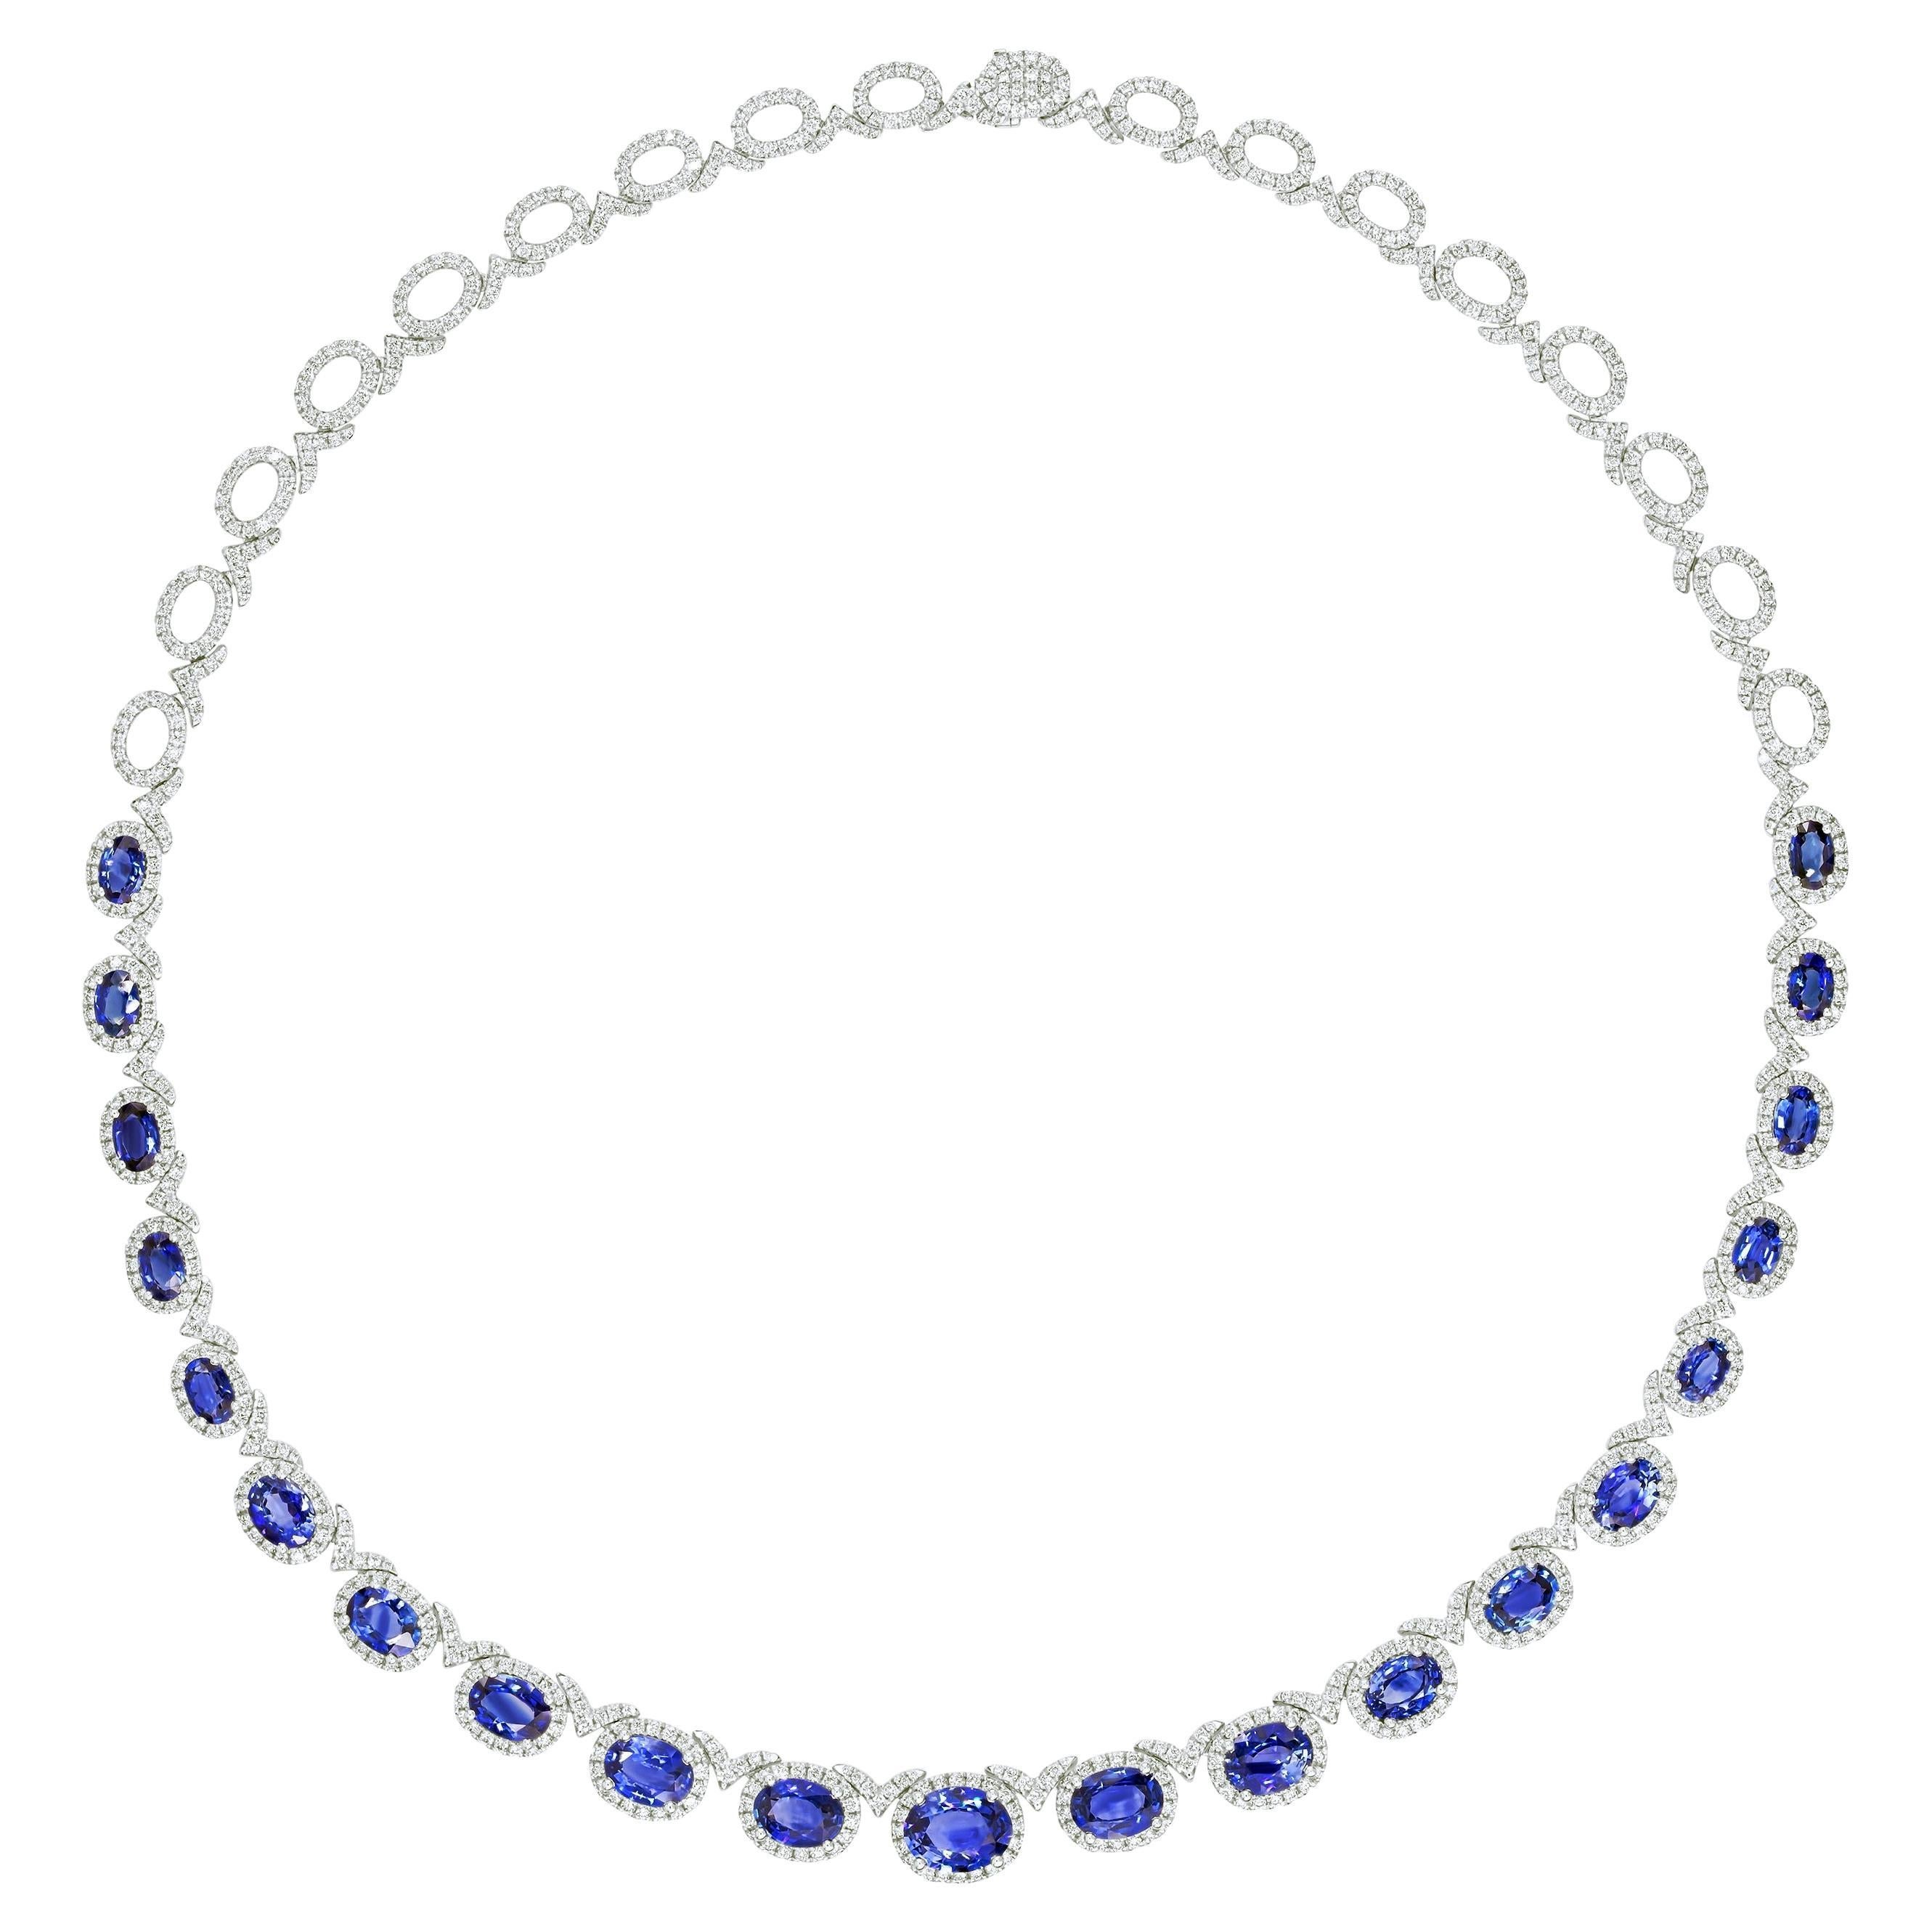 19.34 Ct Vivid Blue Oval Cut Sapphire and 5.65 Ct Diamond Necklace in 18W ref71 For Sale